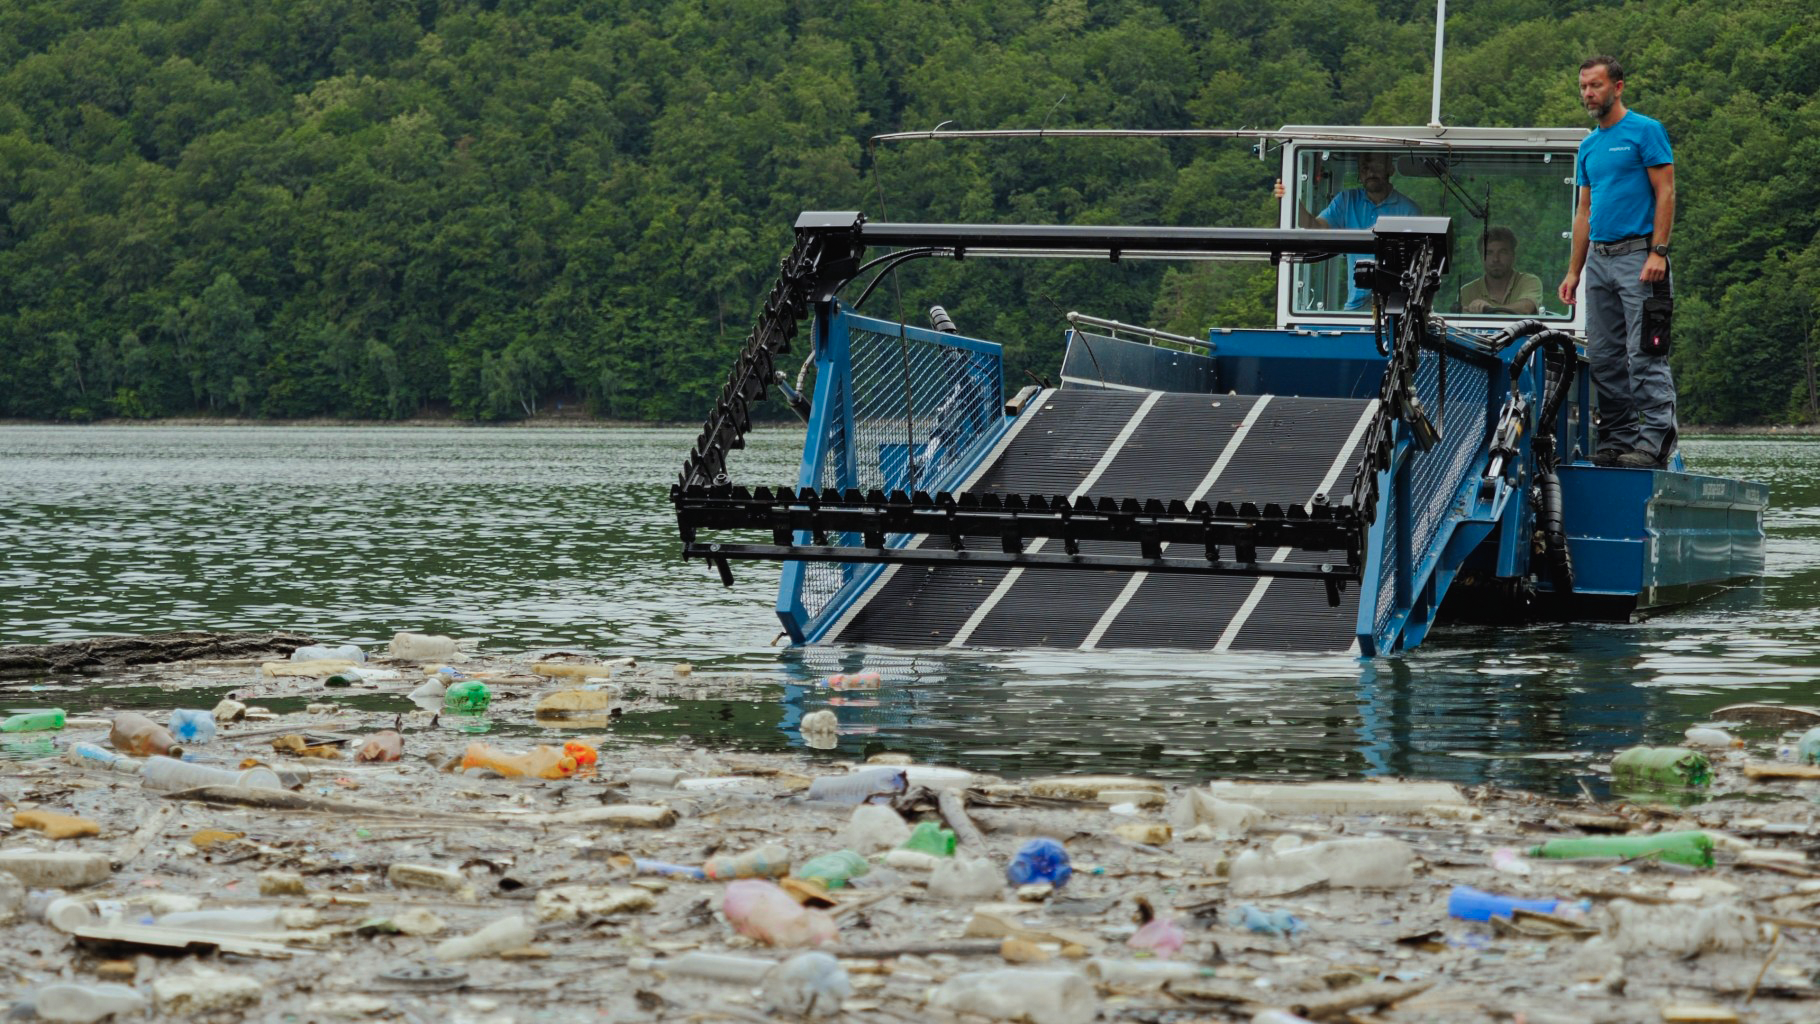 Together for clean rivers: Audi Environmental Foundation, BABOR and everwave launch cleanup initiative